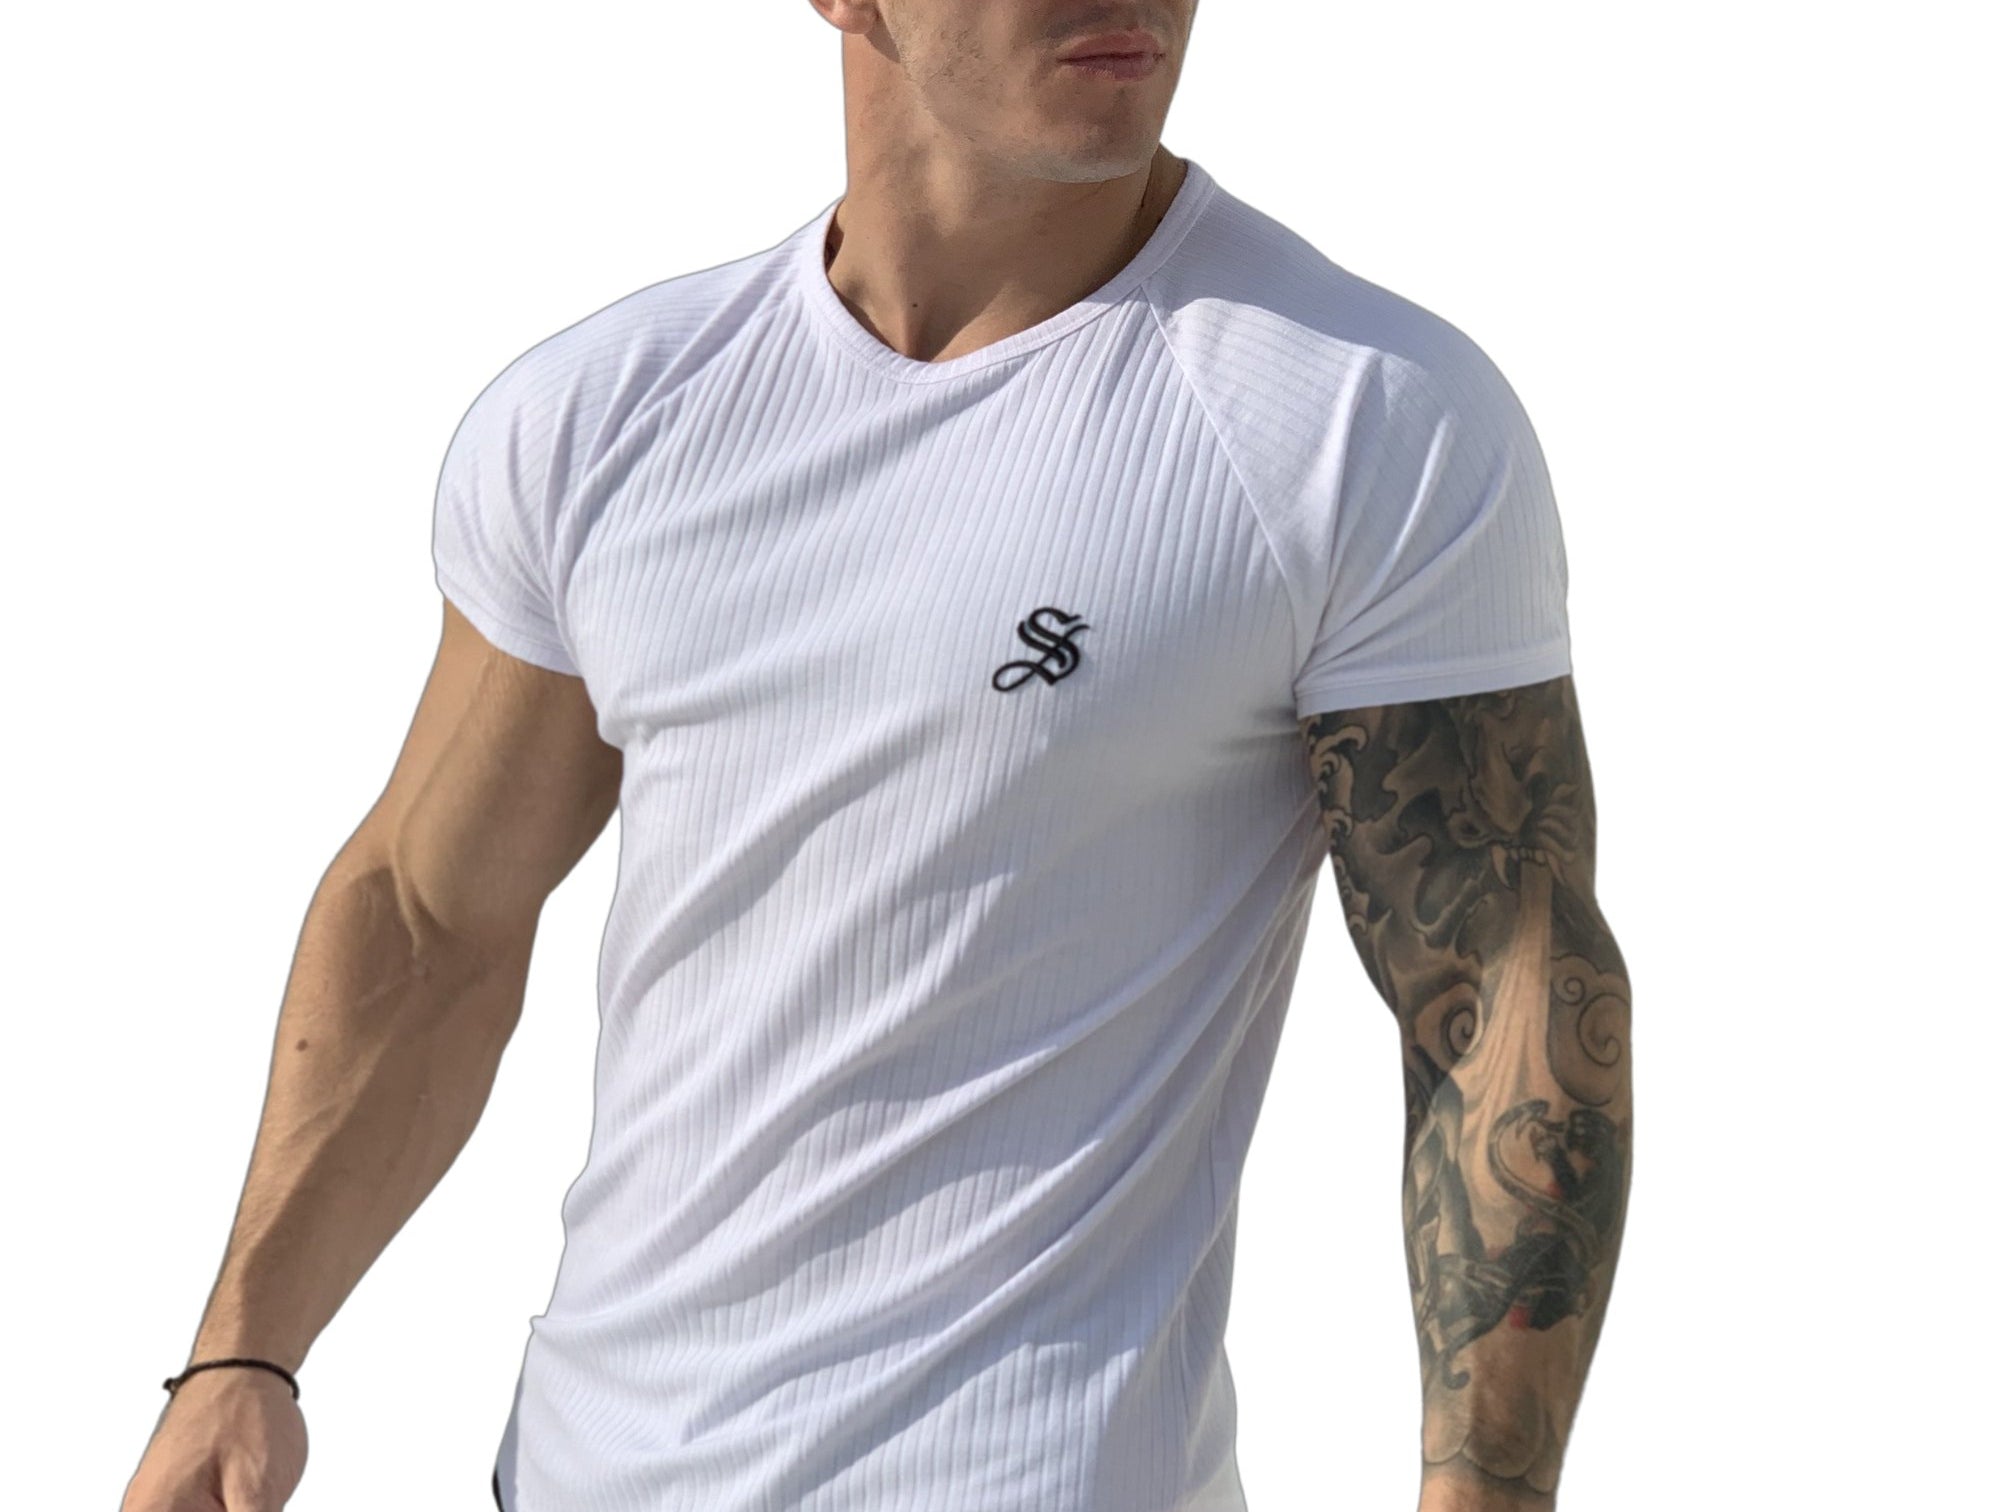 One Half - White T-shirt for Men - Sarman Fashion - Wholesale Clothing Fashion Brand for Men from Canada